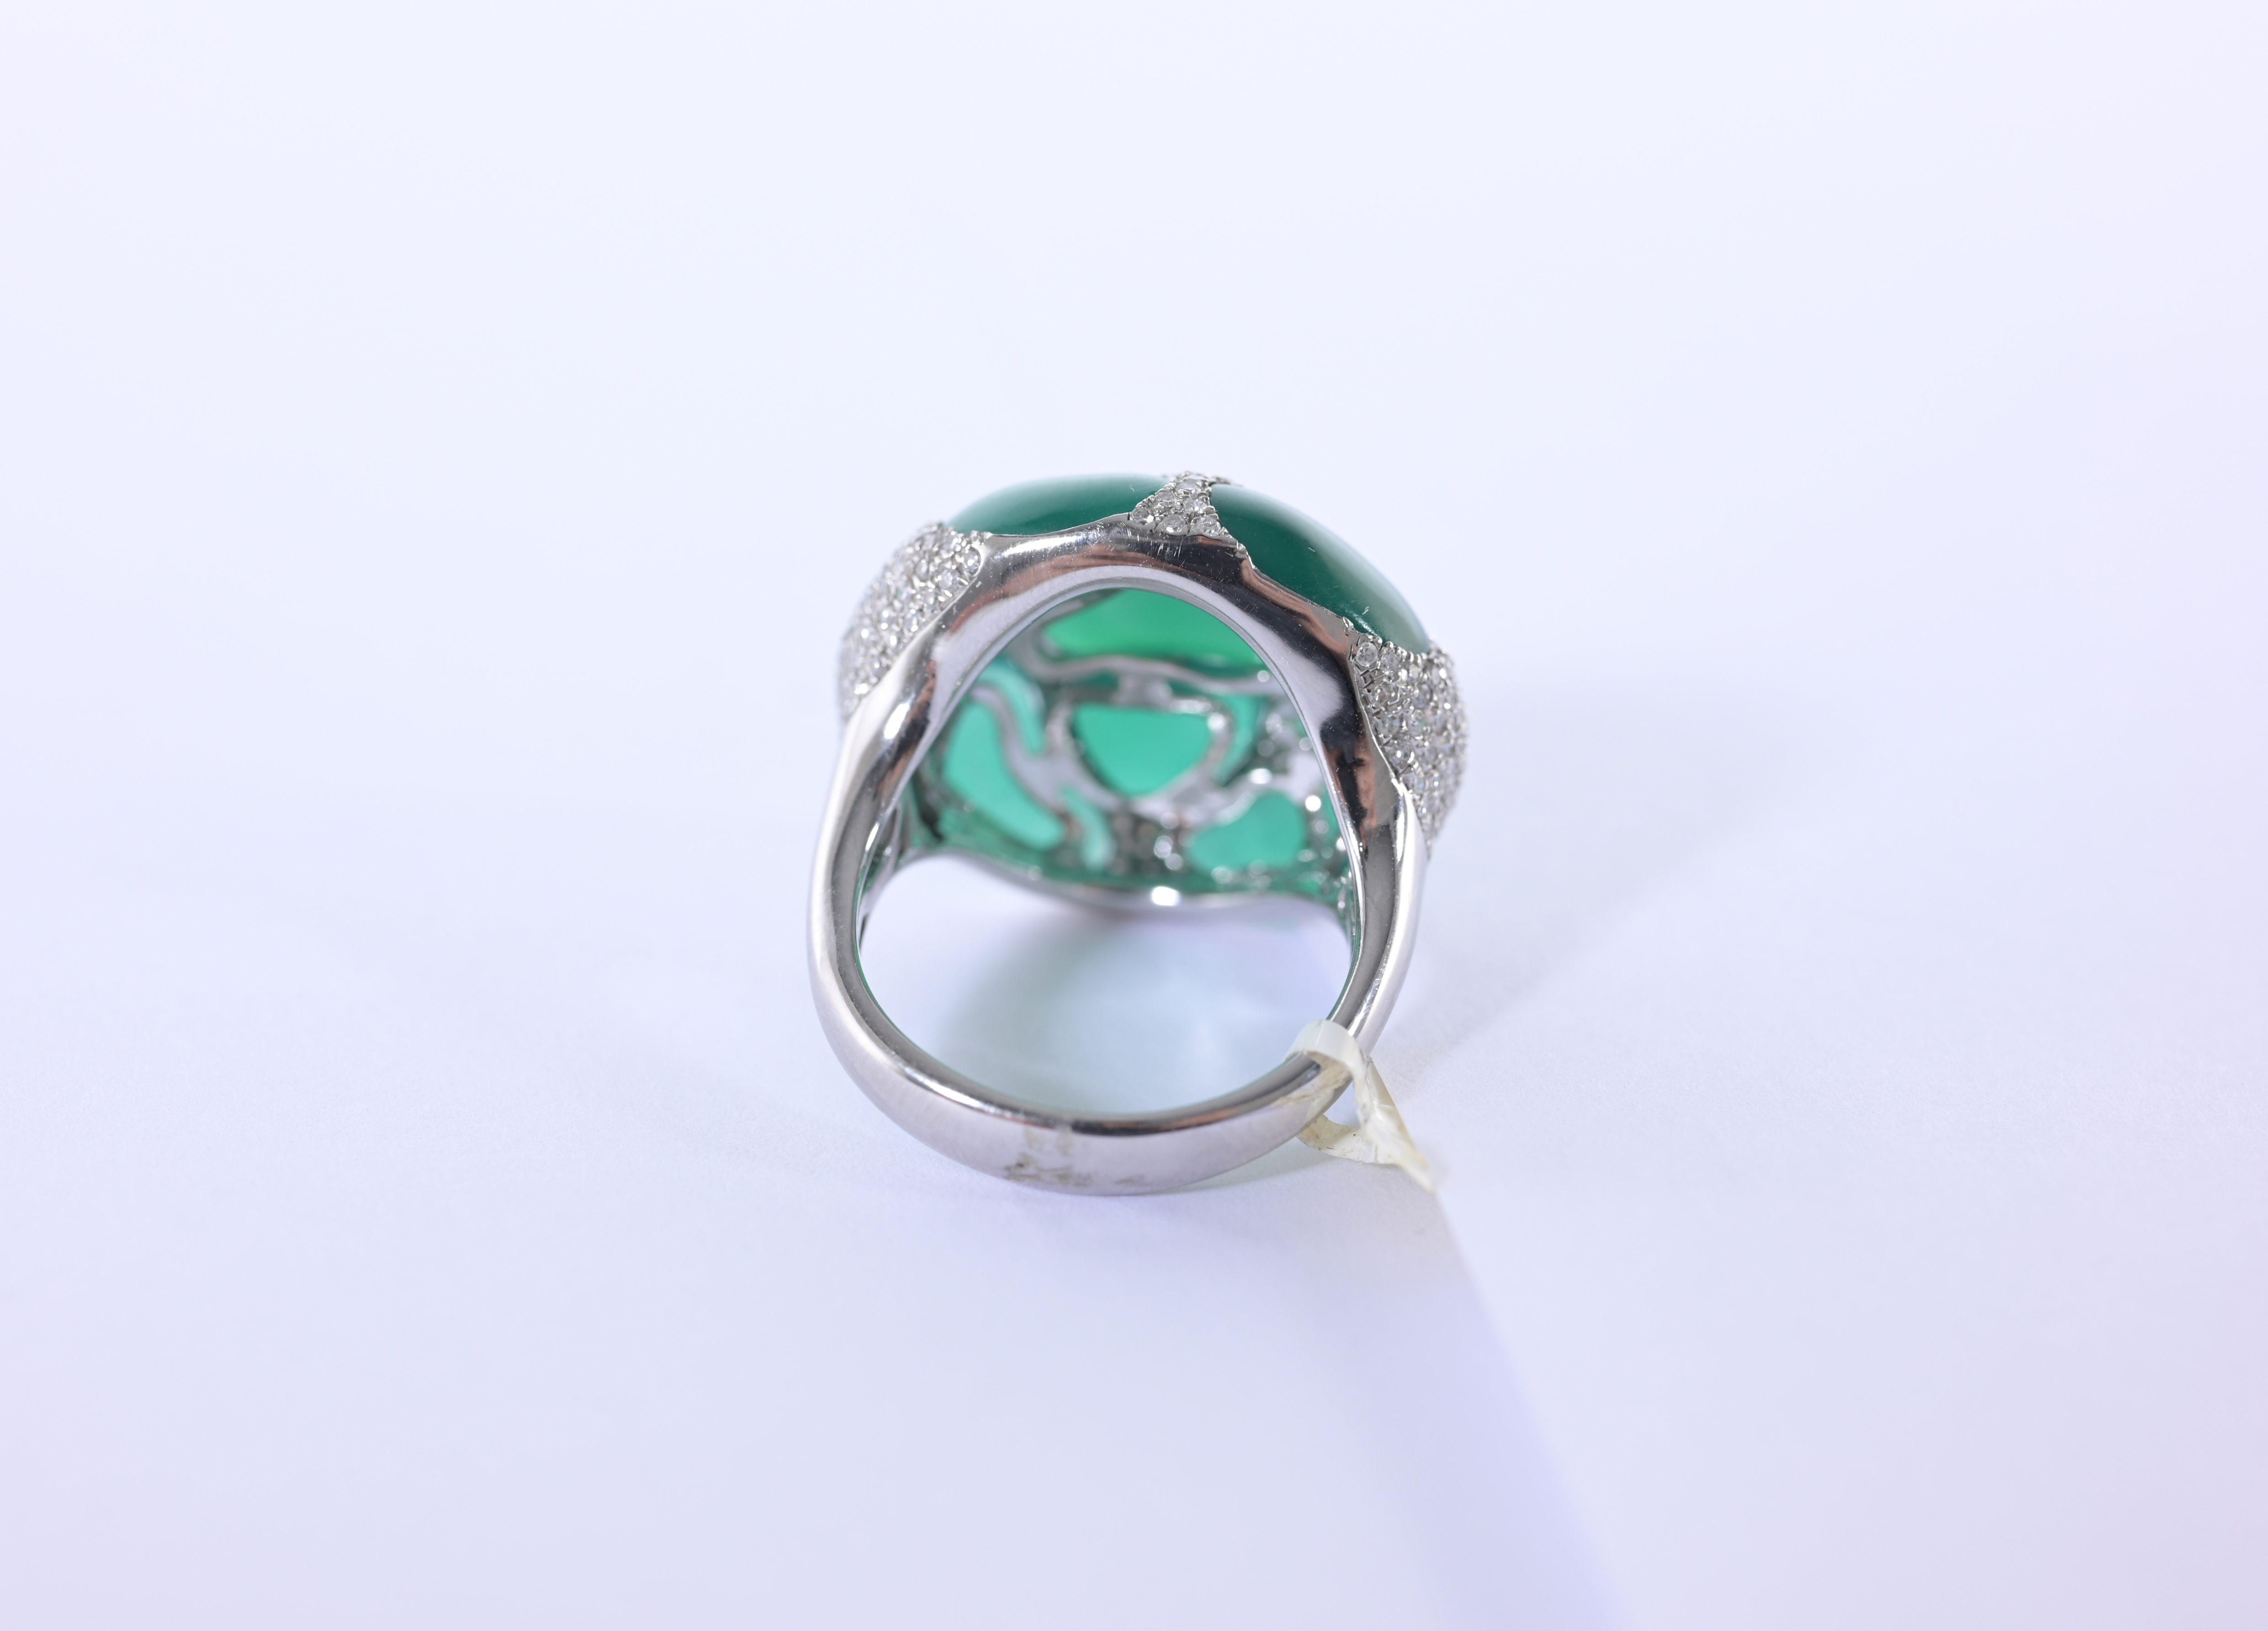 14 White Gold, Green Agate & Diamond Ring - Image 6 of 7